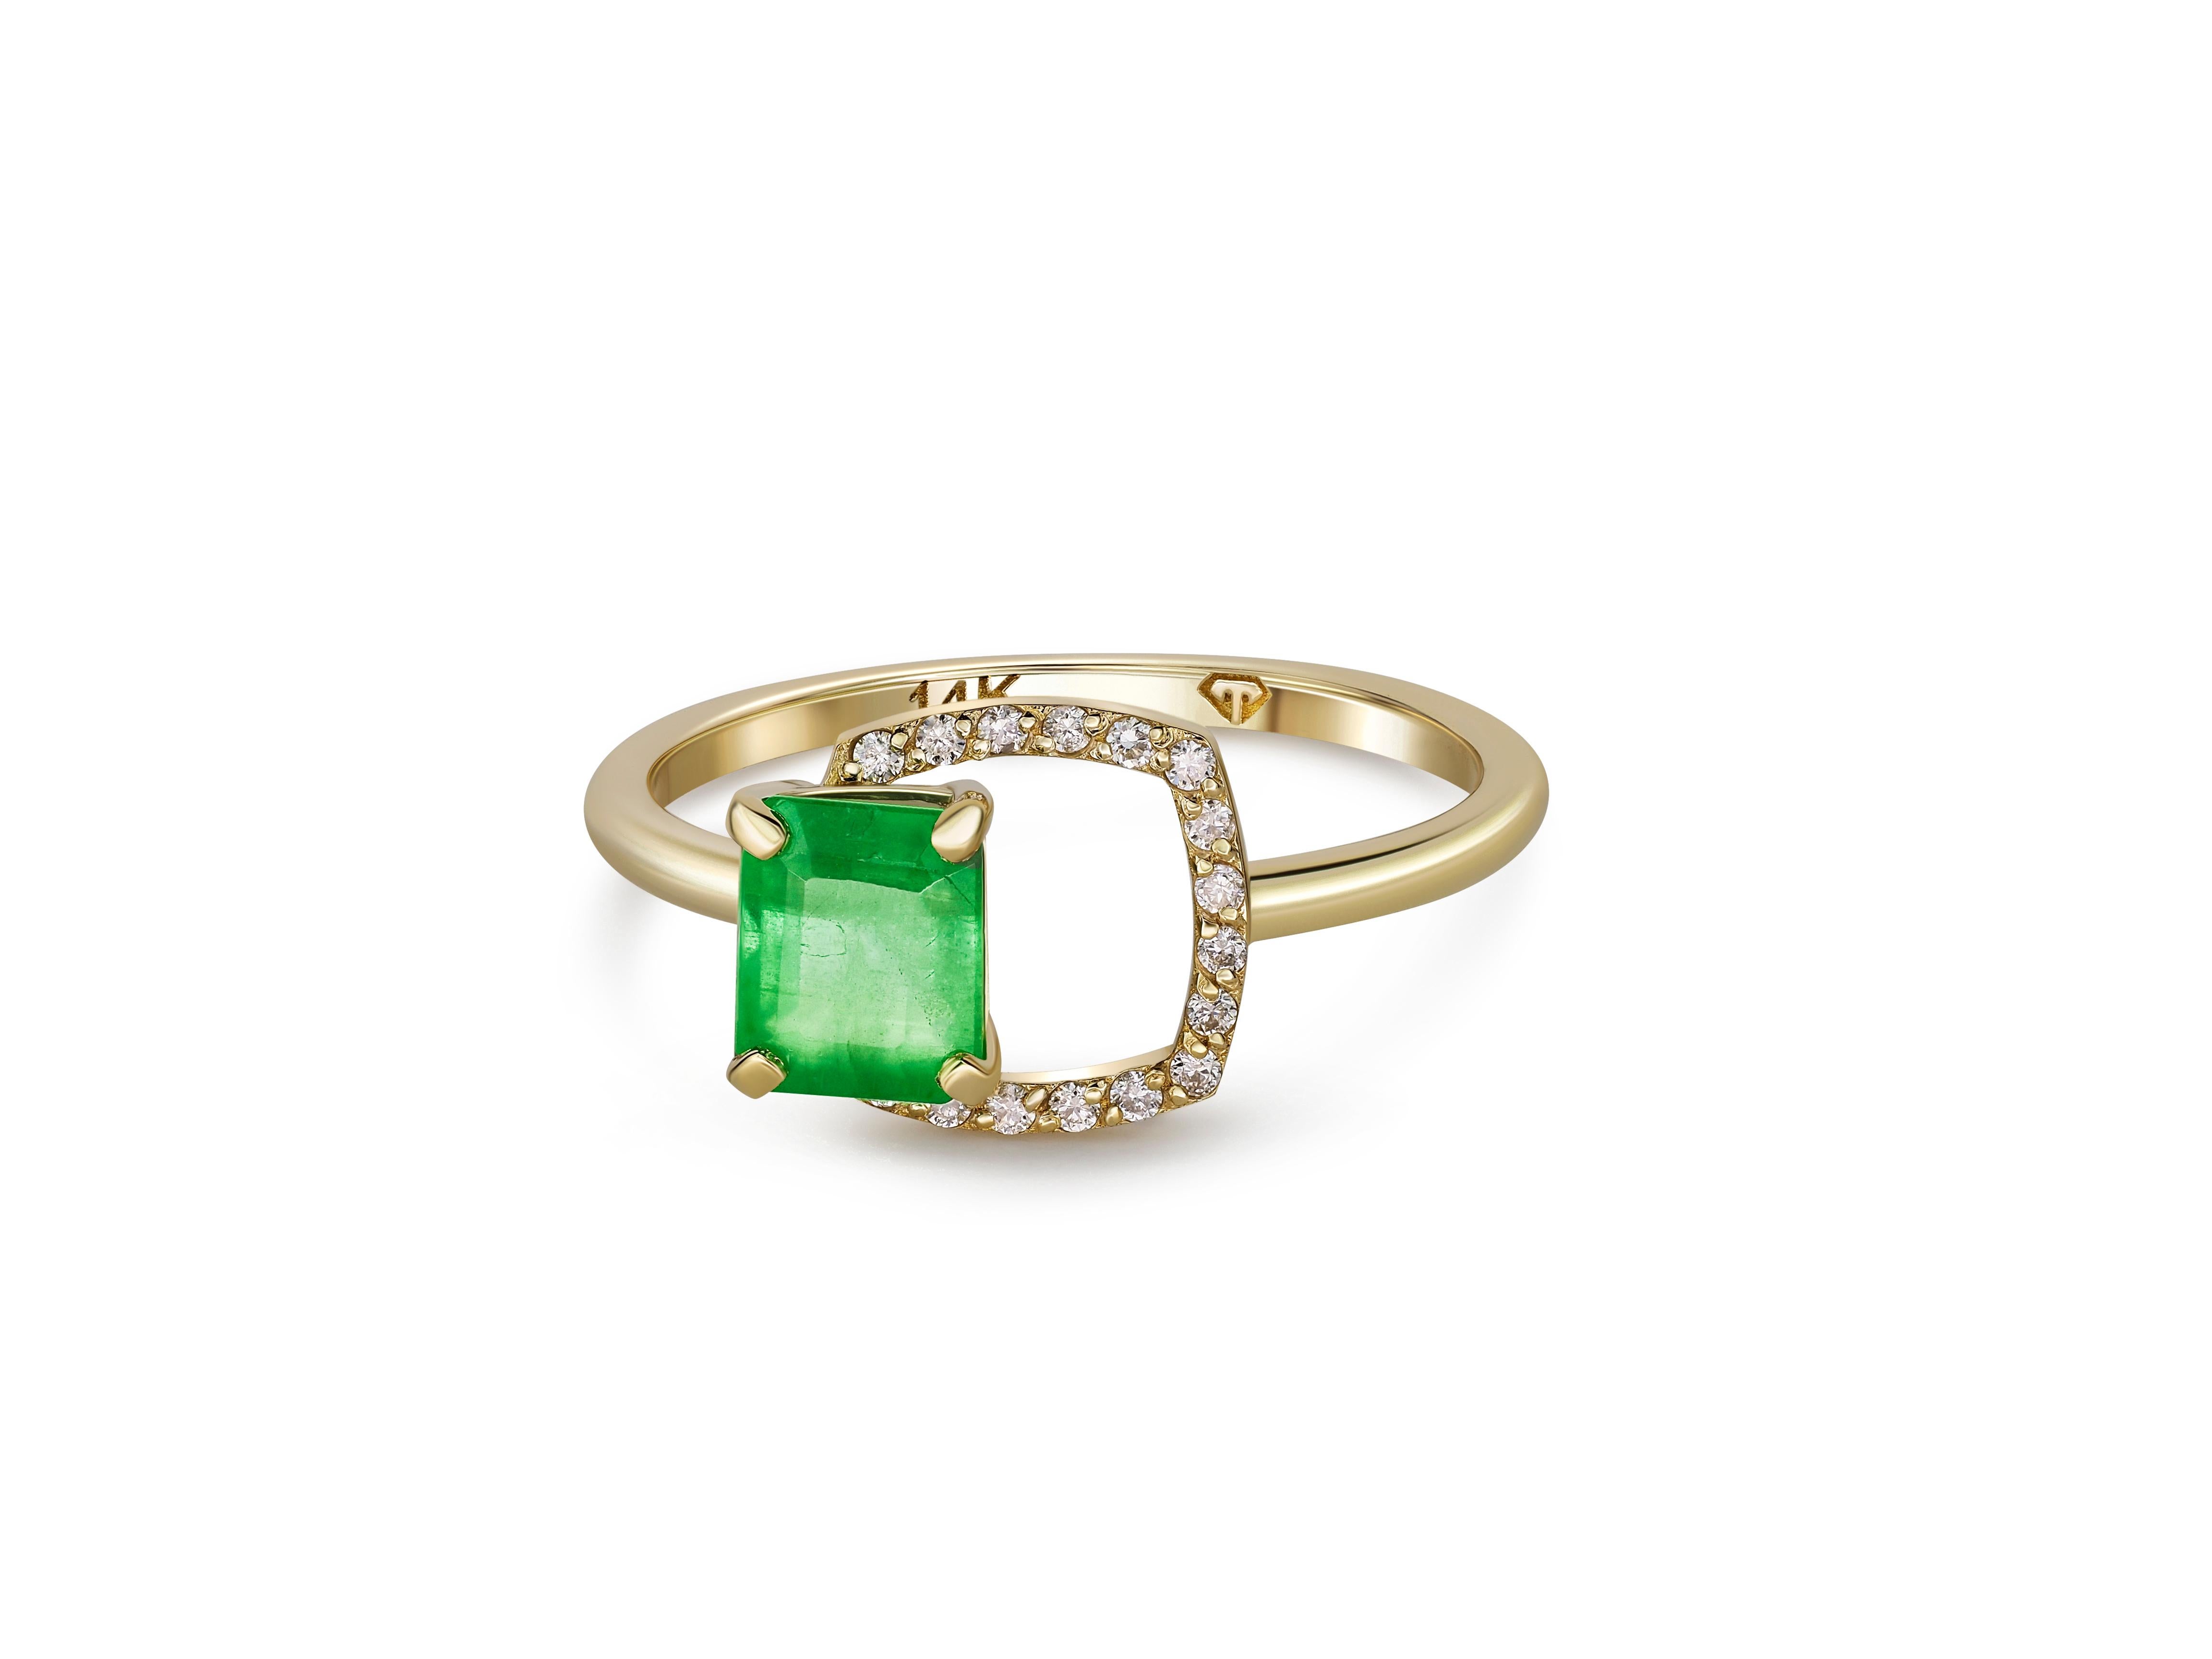 For Sale:  Emerald Ring in 14 Karat Gold, Octagon Emerald Ring, May Birthstone Emerald Ring 8